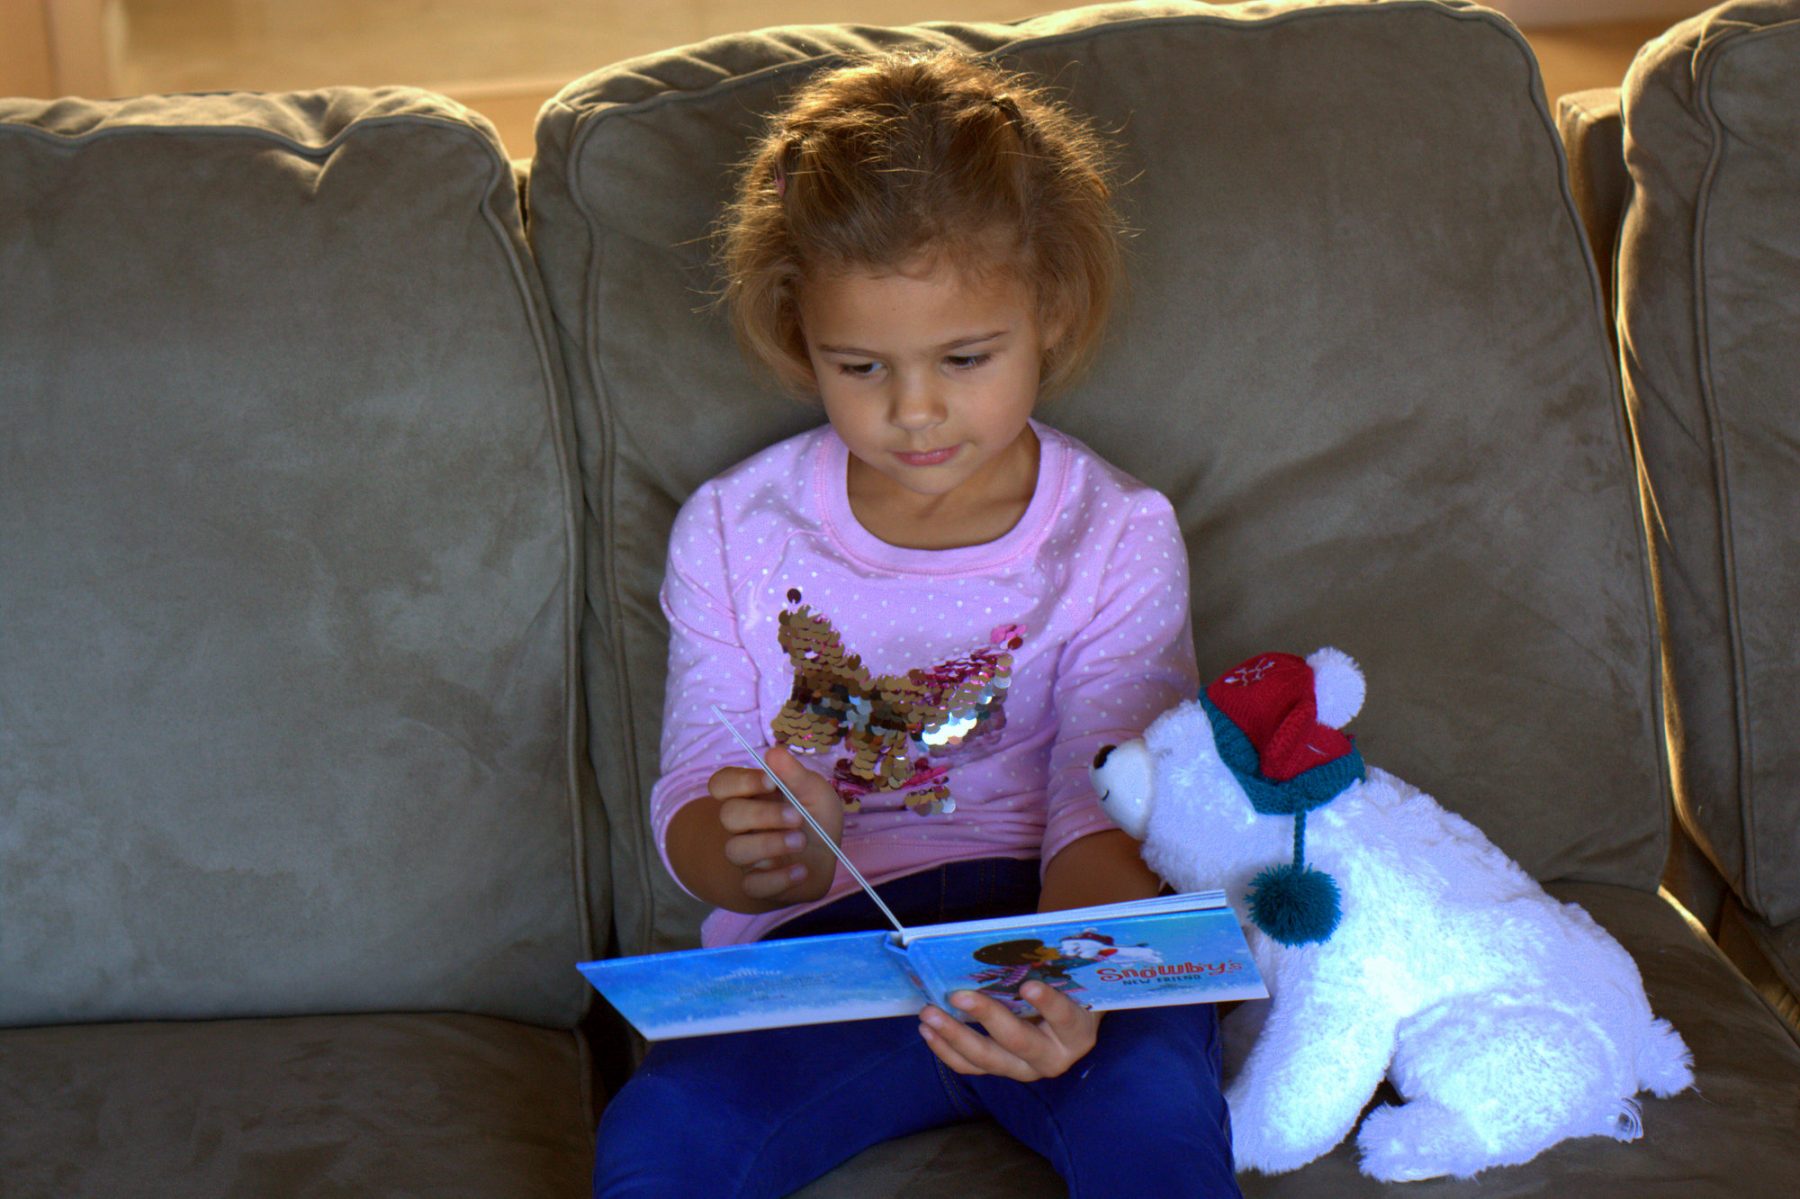 A little girl reading a story to a stuffed animal